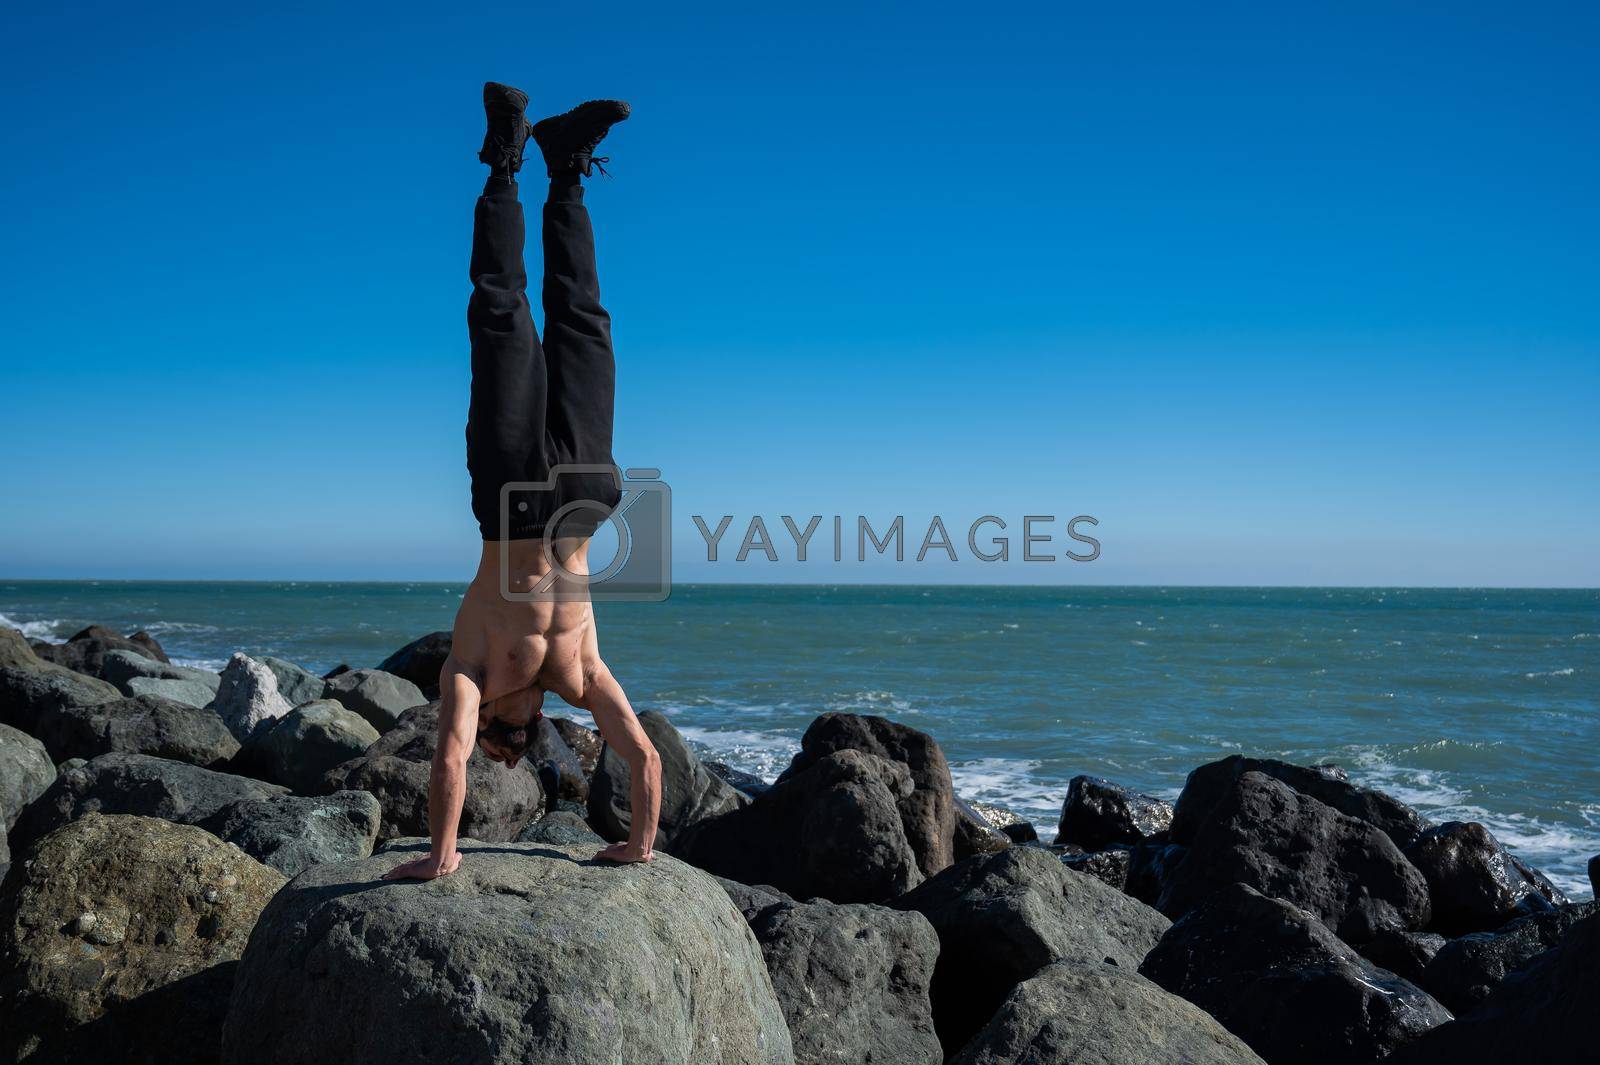 Royalty free image of Shirtless man doing handstand on rocks by the sea. by mrwed54